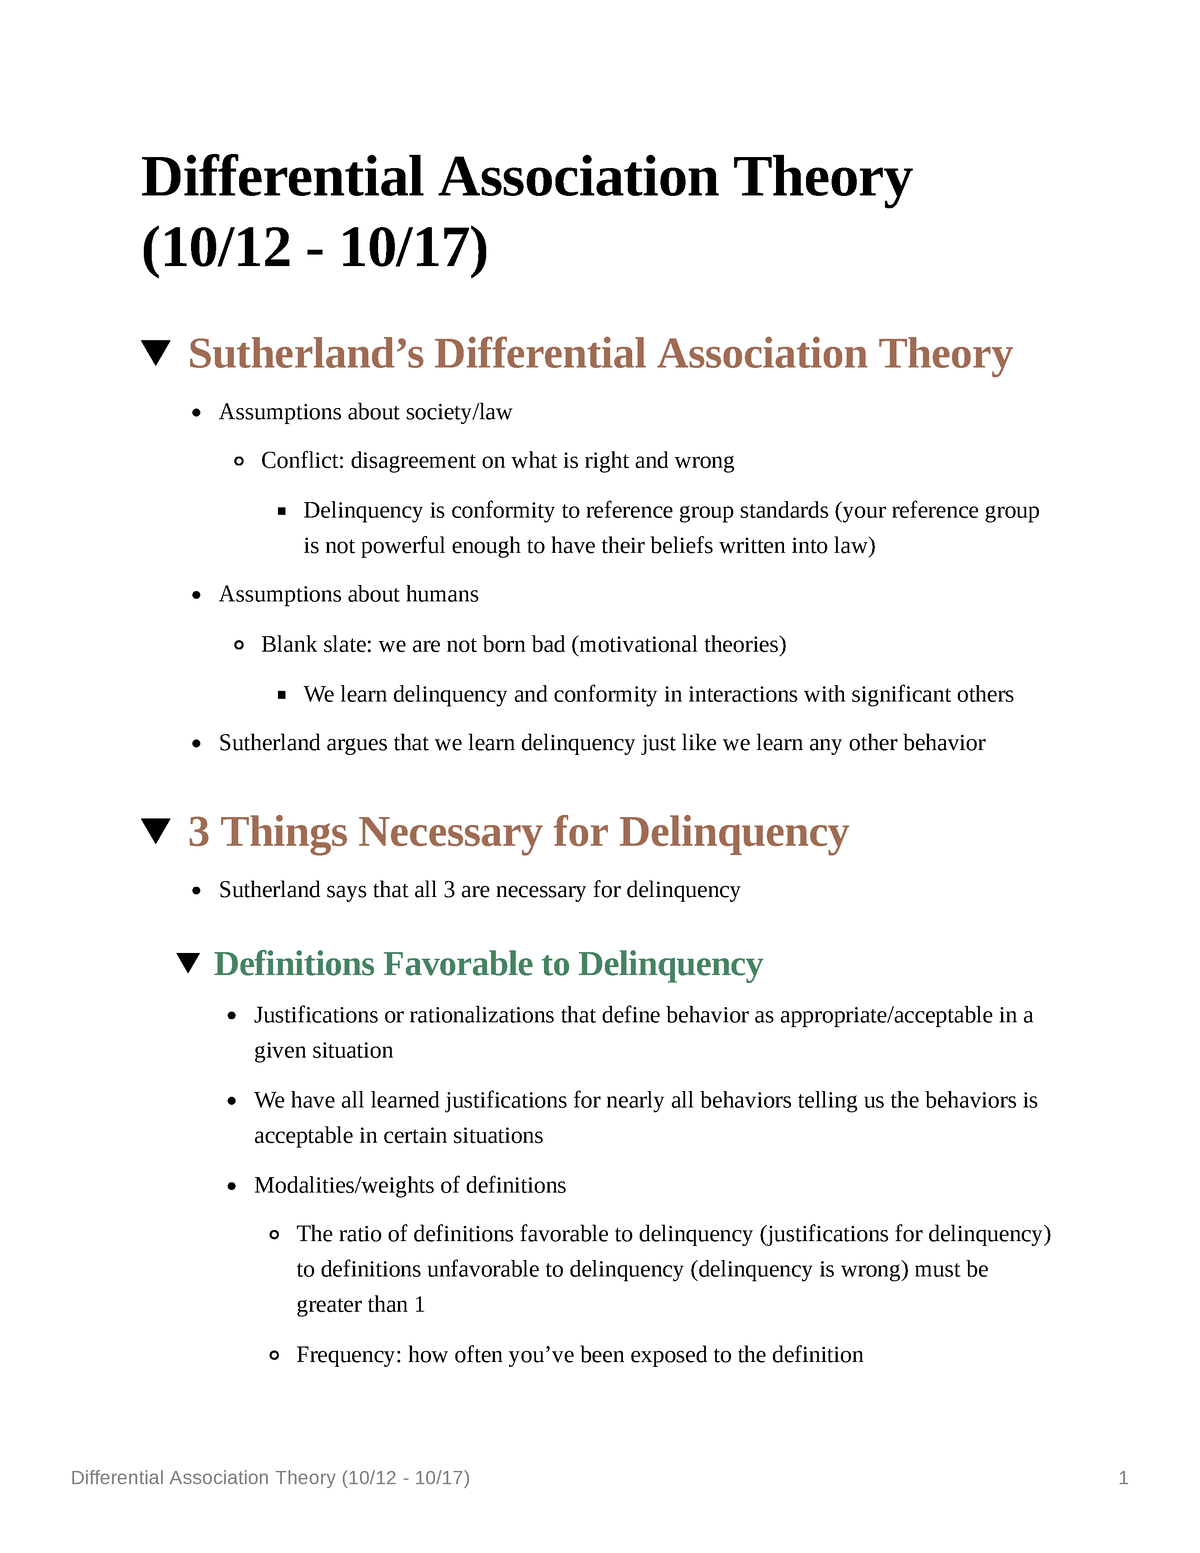 Differential Association Theory - Examples, Pros and Cons